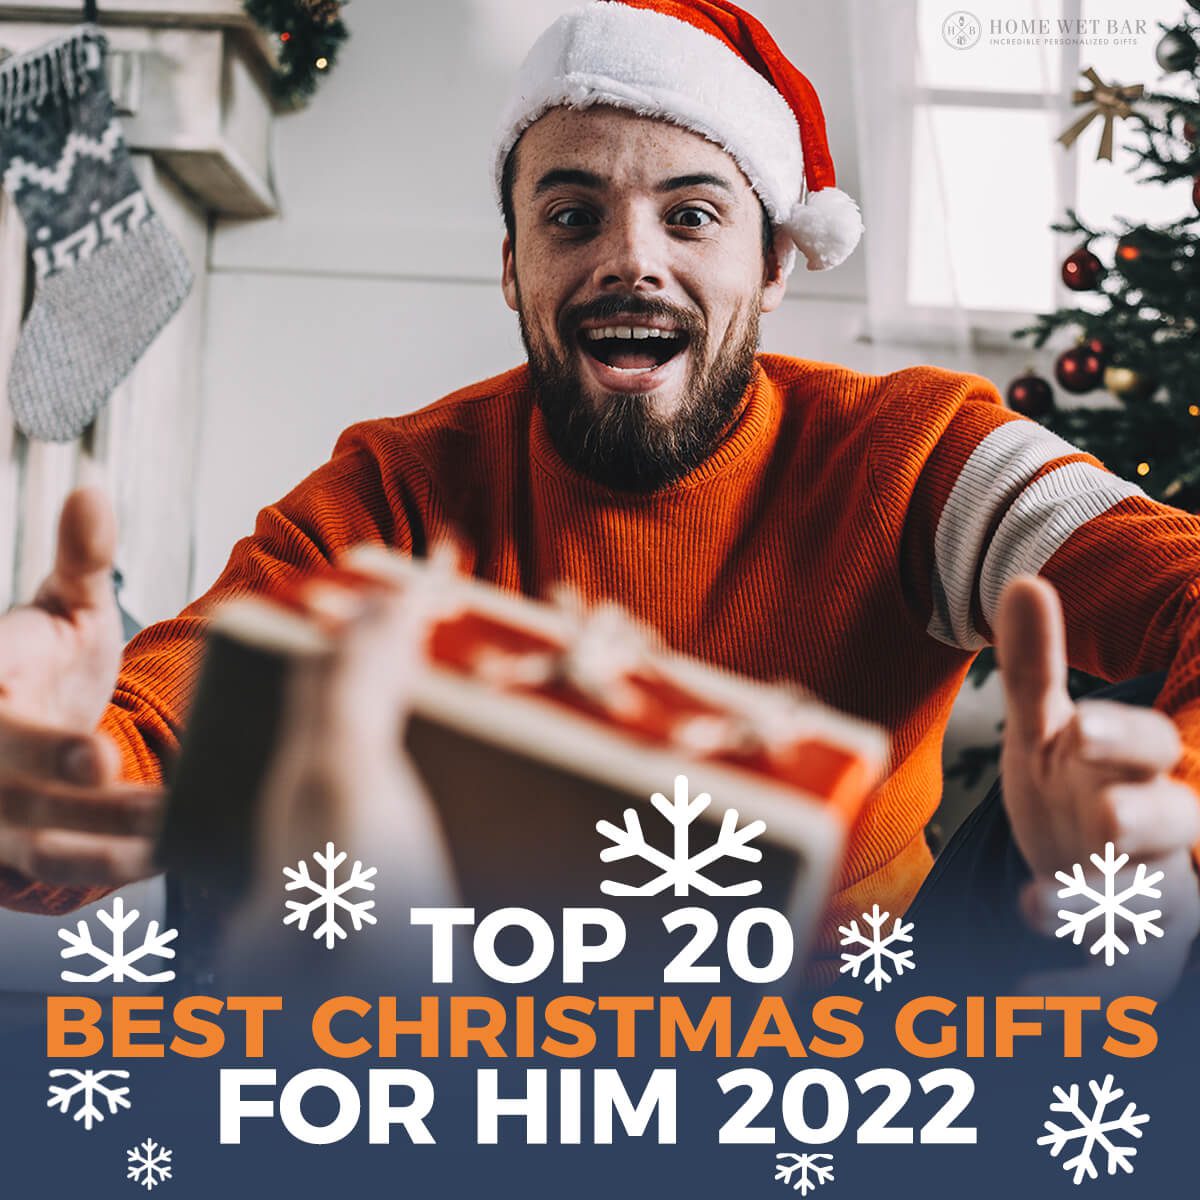 TOP 20 – Best Christmas Gifts for Him 2022